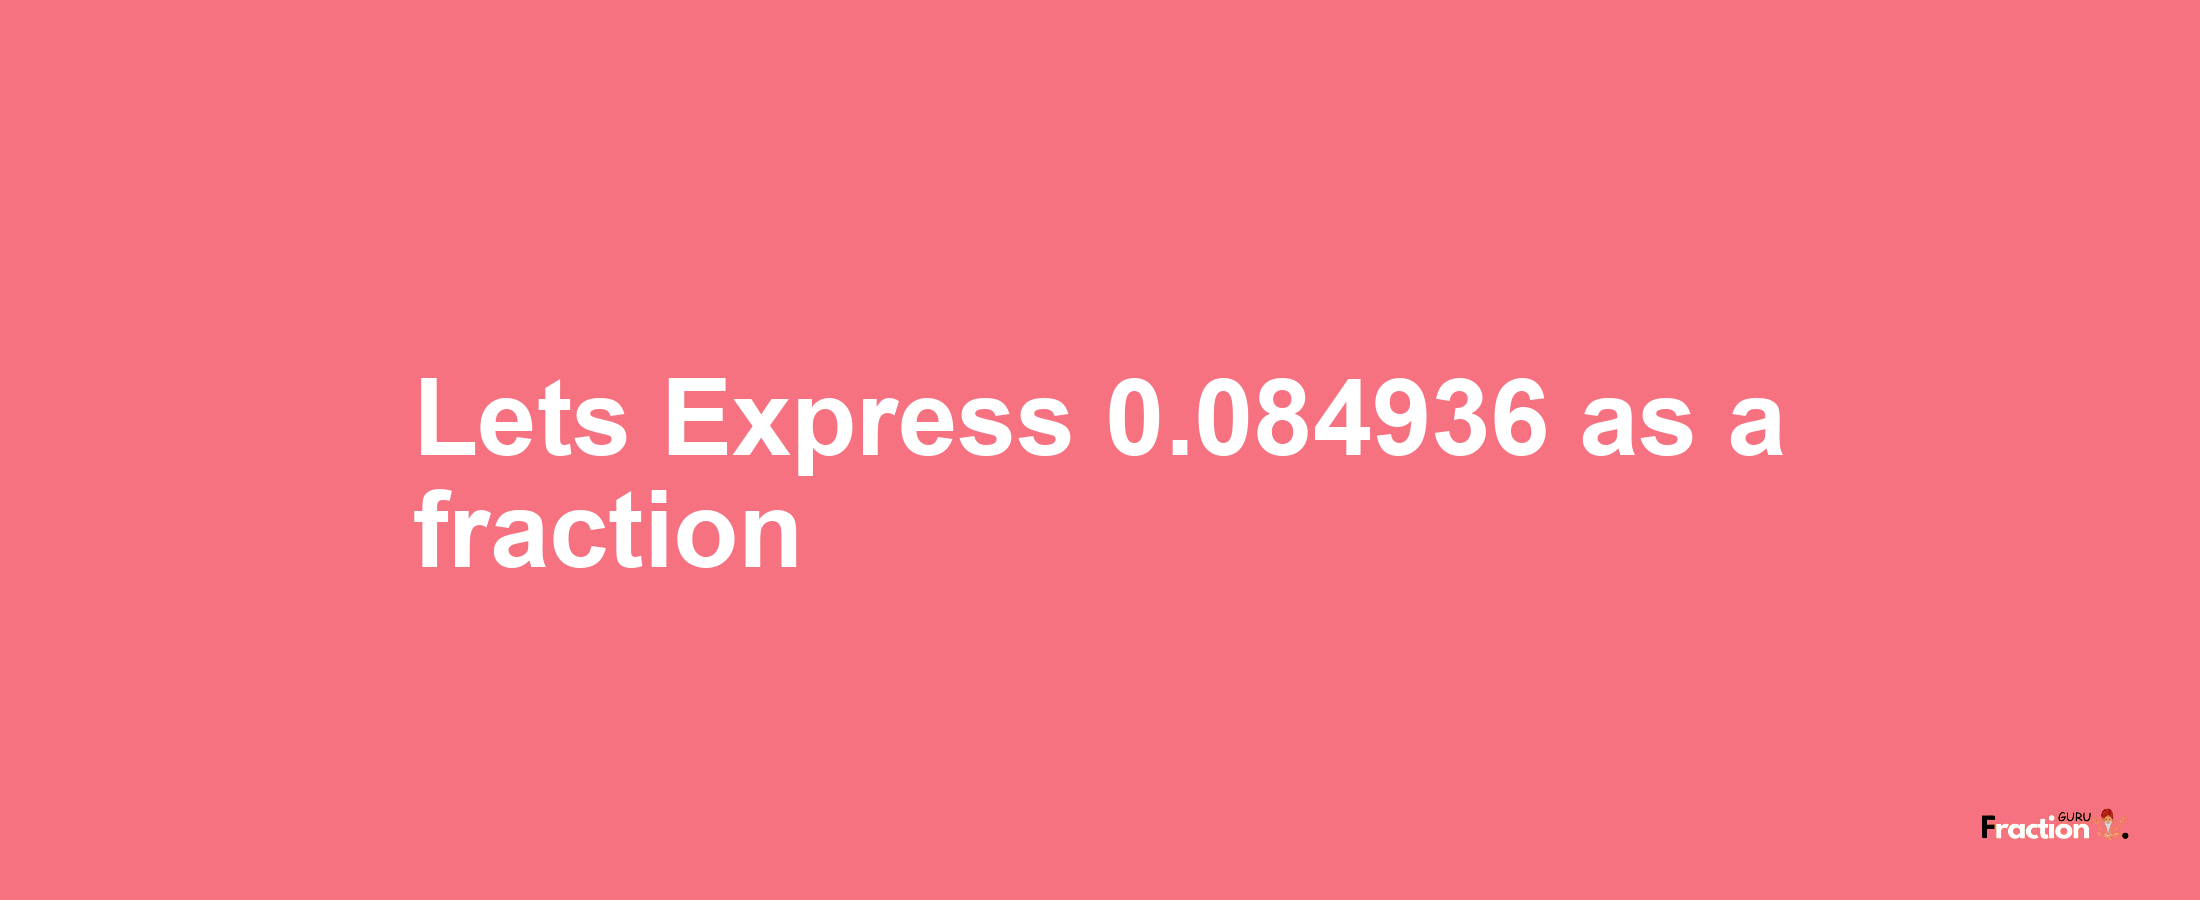 Lets Express 0.084936 as afraction